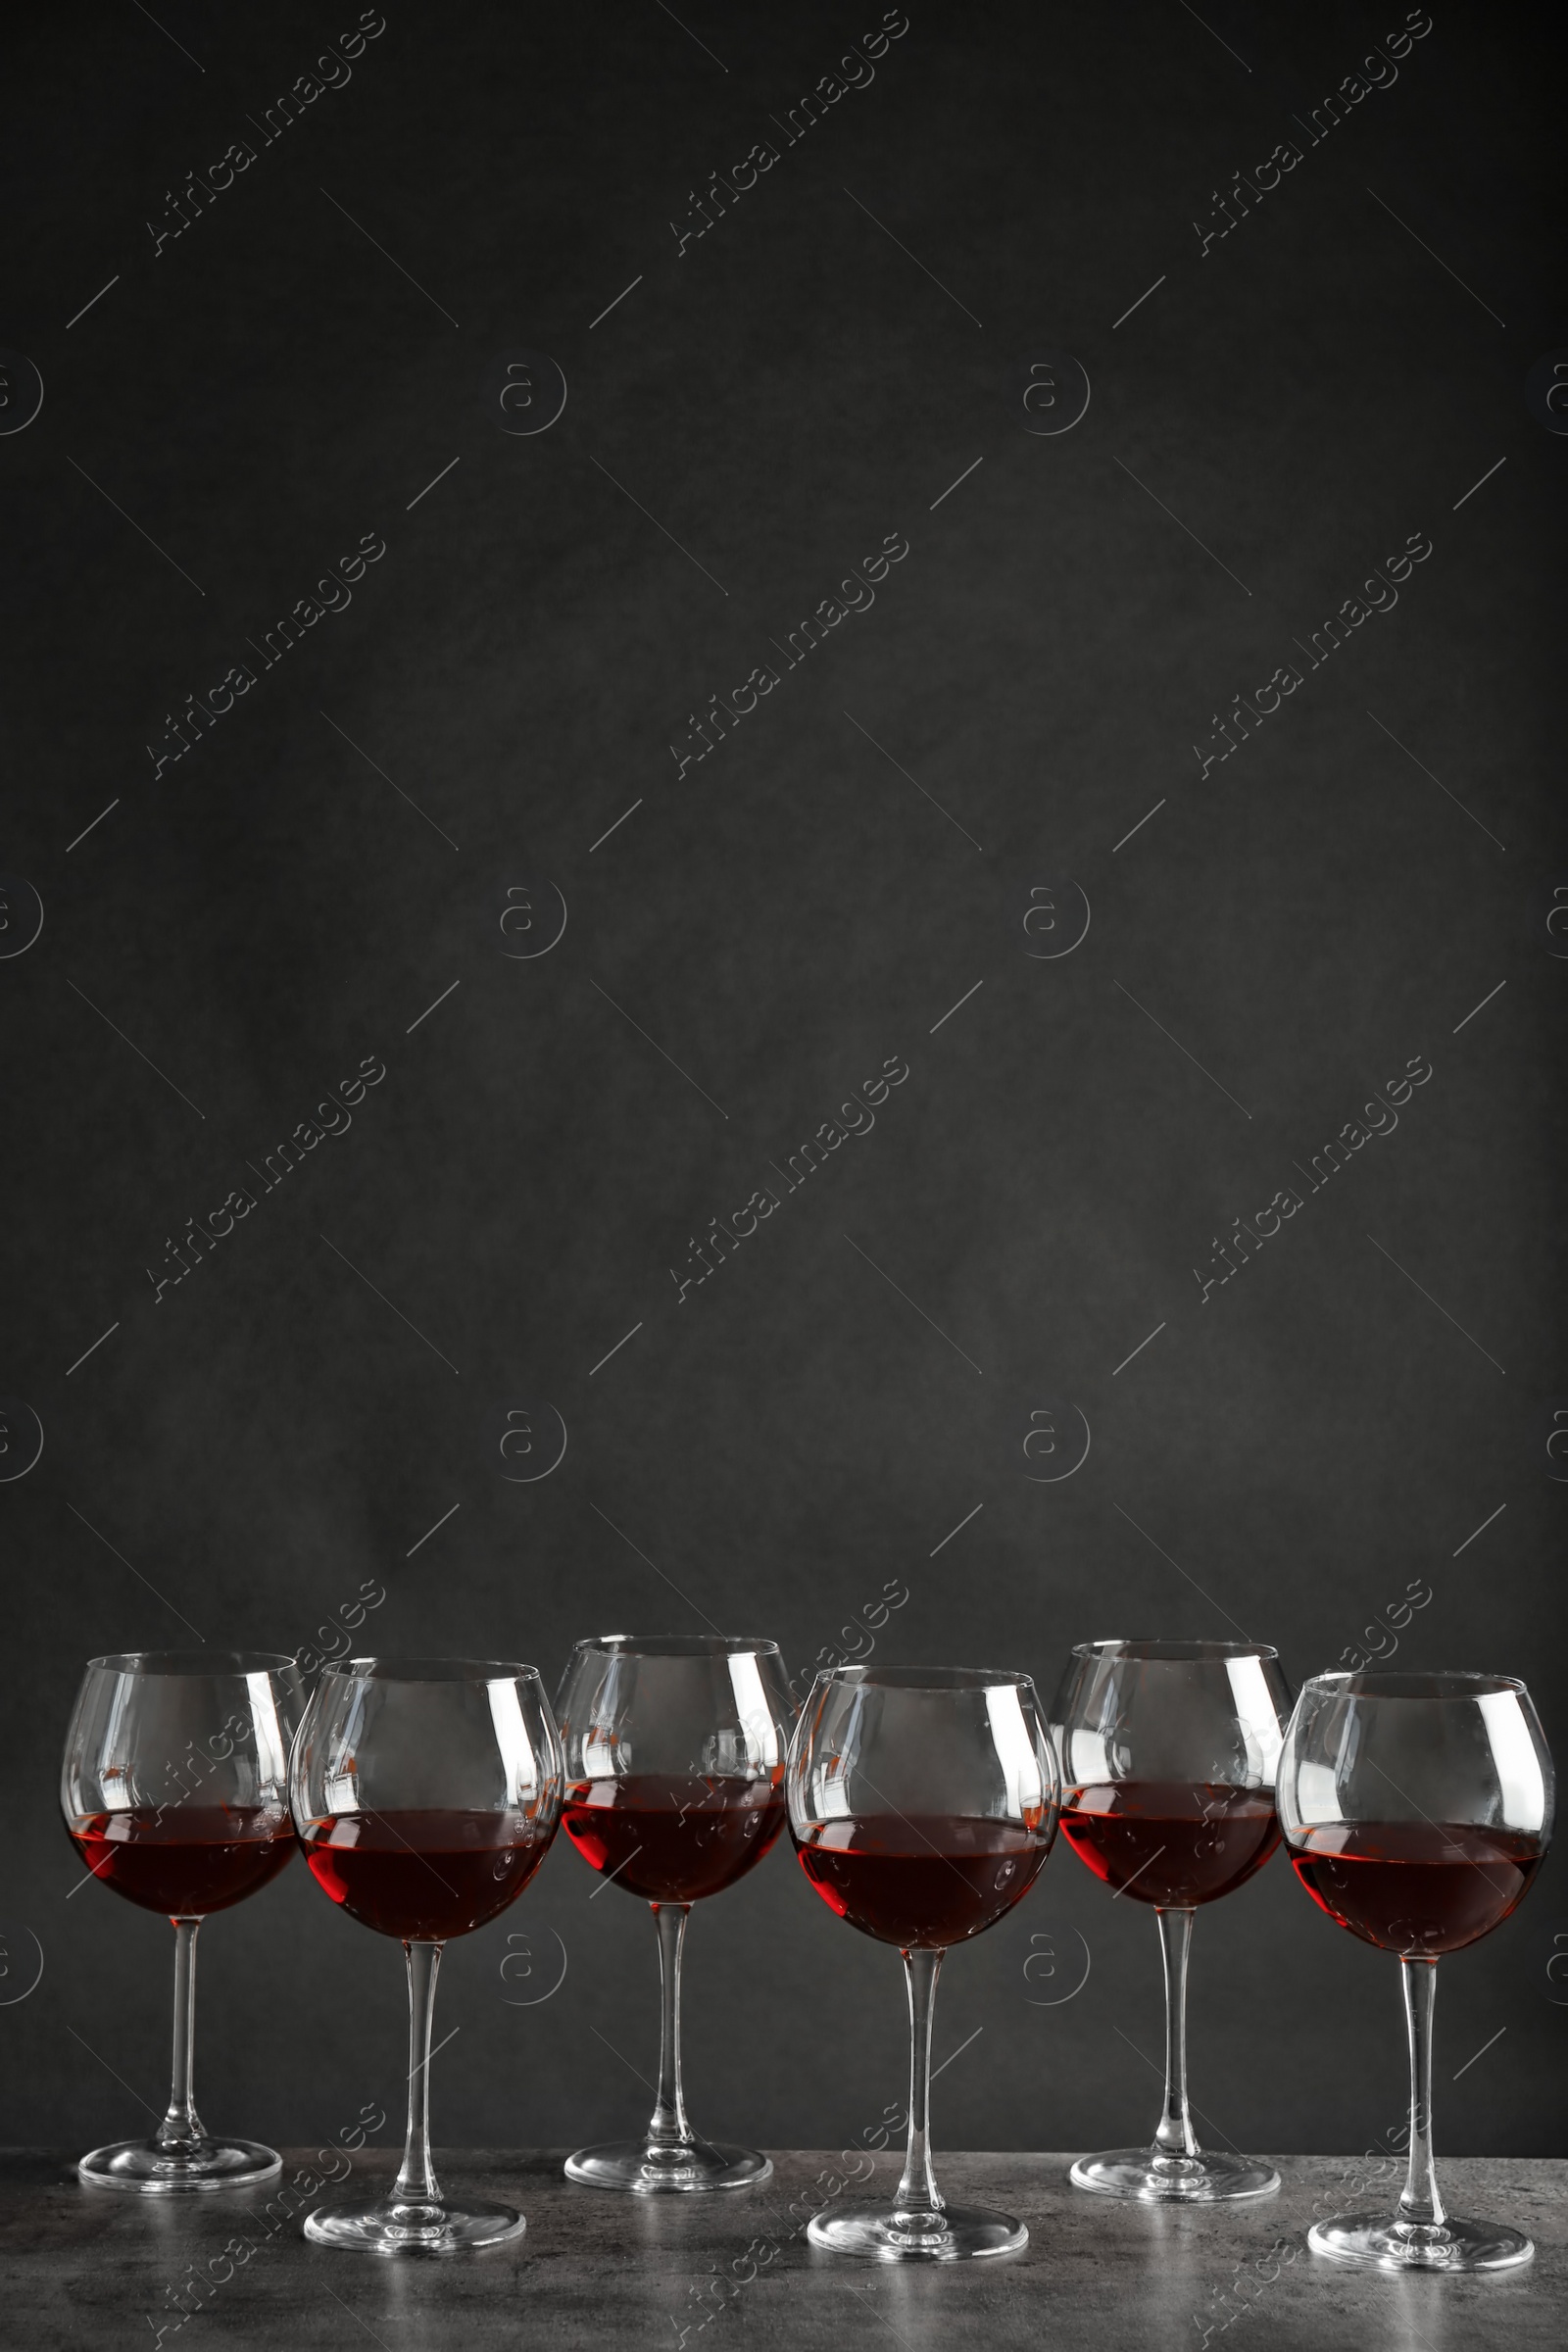 Photo of Glasses with red wine on table against dark background